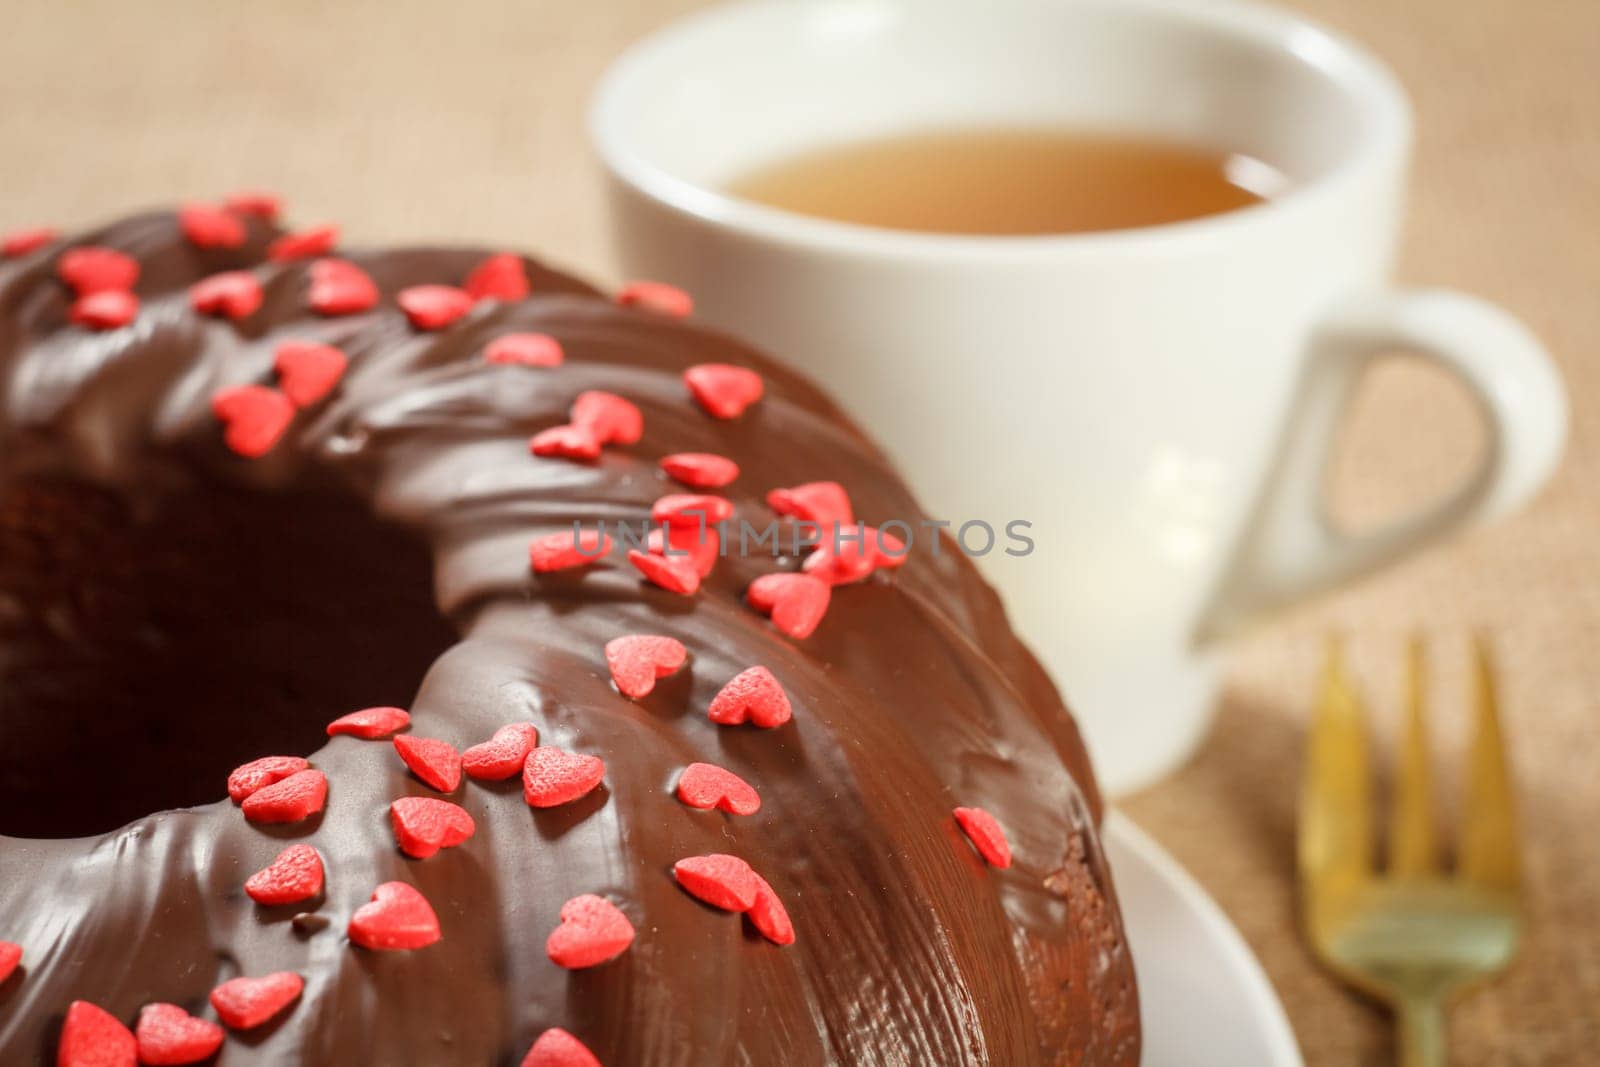 Close-up homemade chocolate cake decorated with small hearts made of caramel on plate and cup of tea on table. Shallow depth of field.